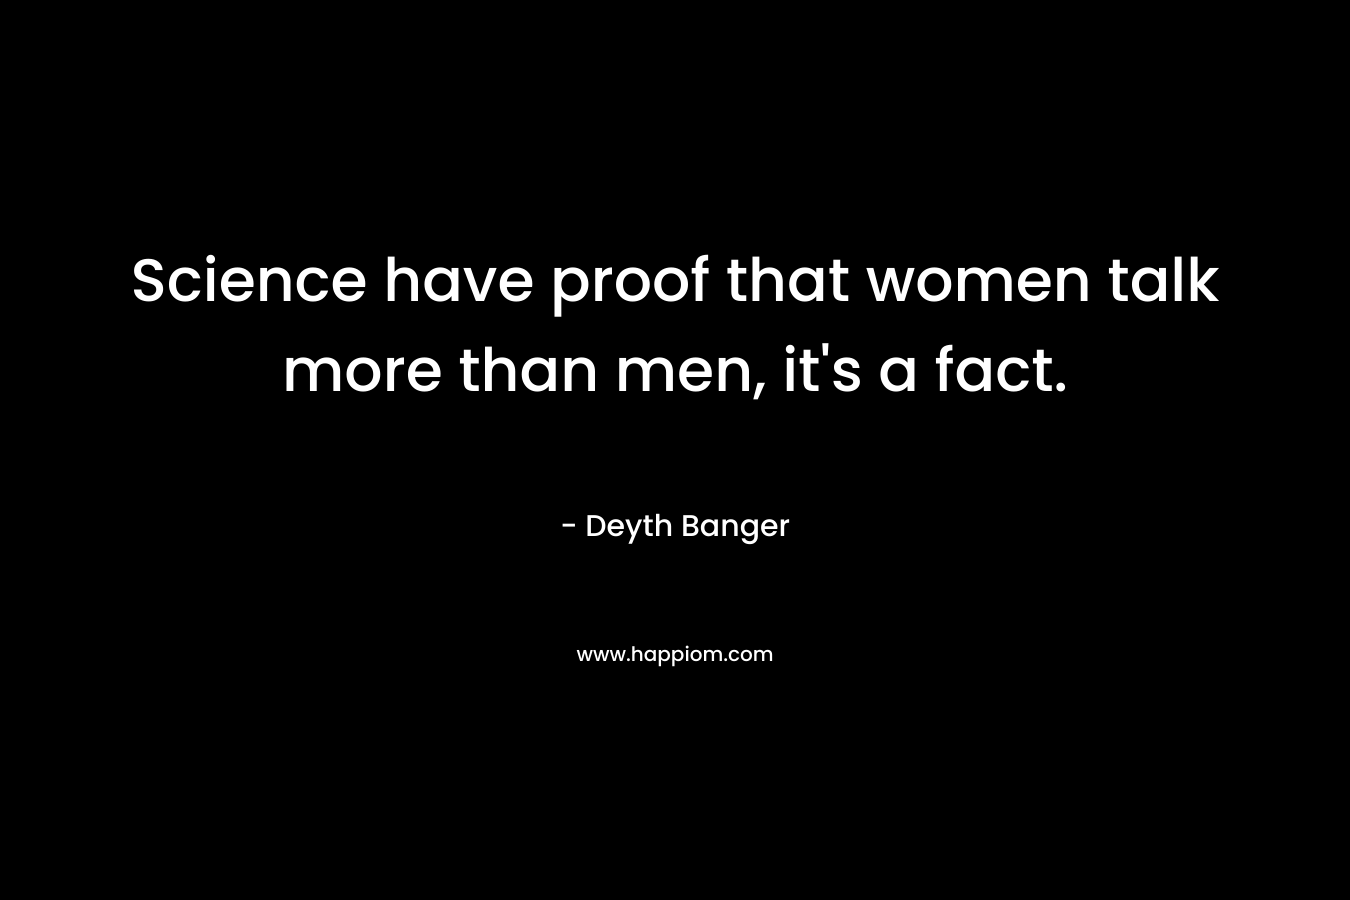 Science have proof that women talk more than men, it's a fact.